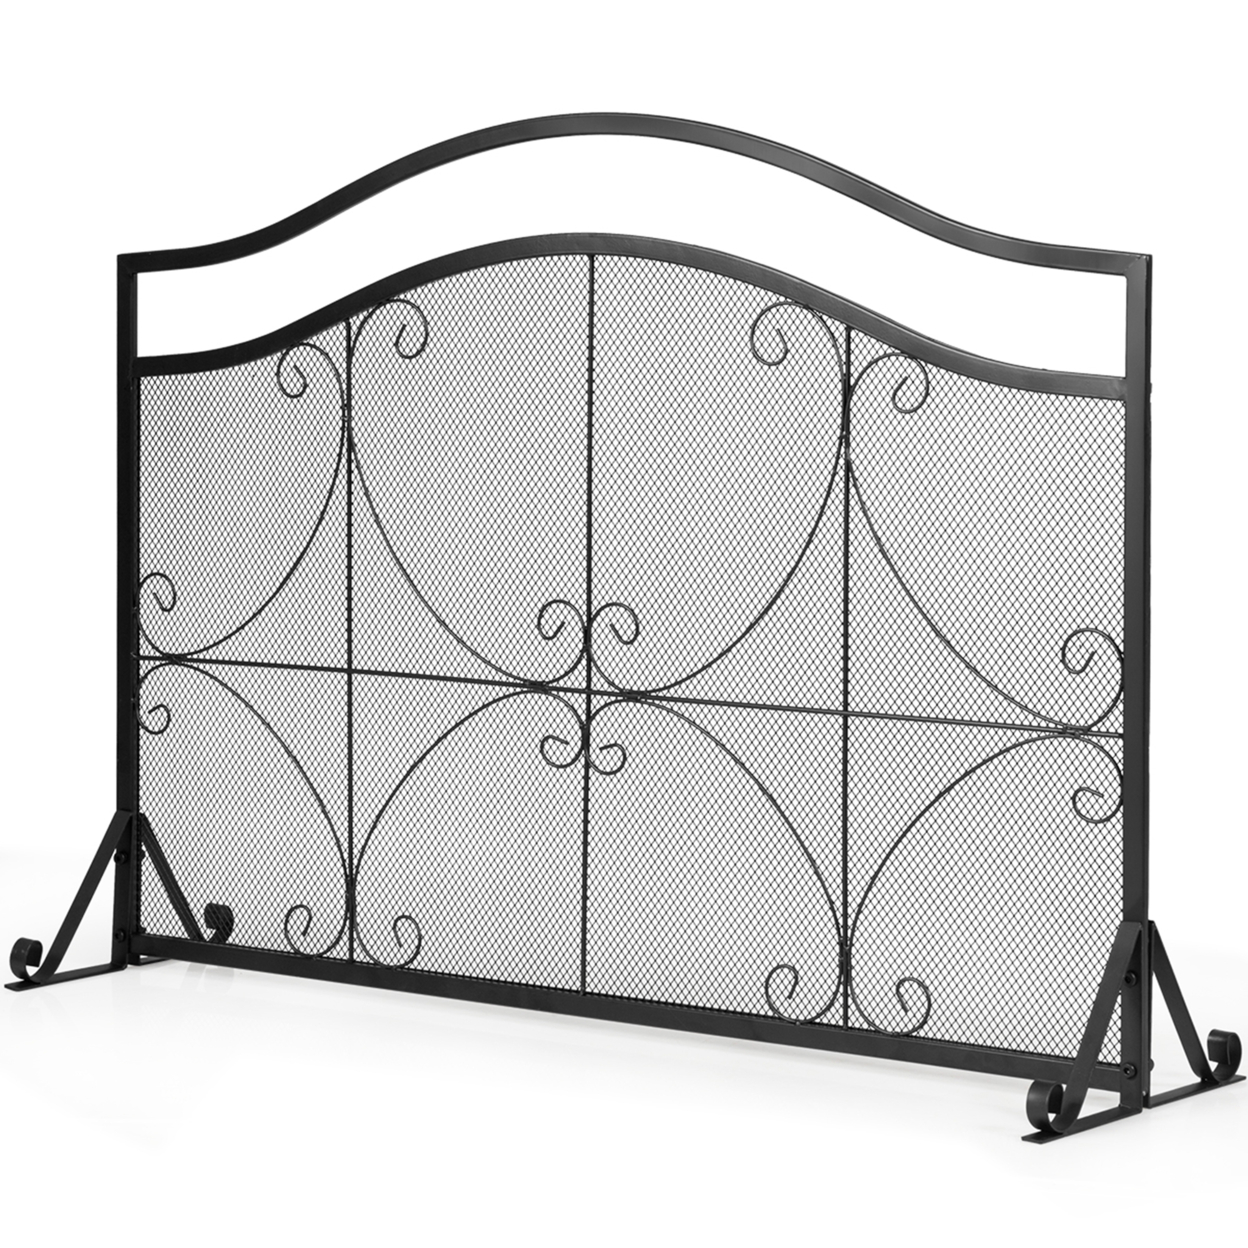 Single Panel Fireplace Screen Free Standing Spark Guard Fence For Baby Pet Safe